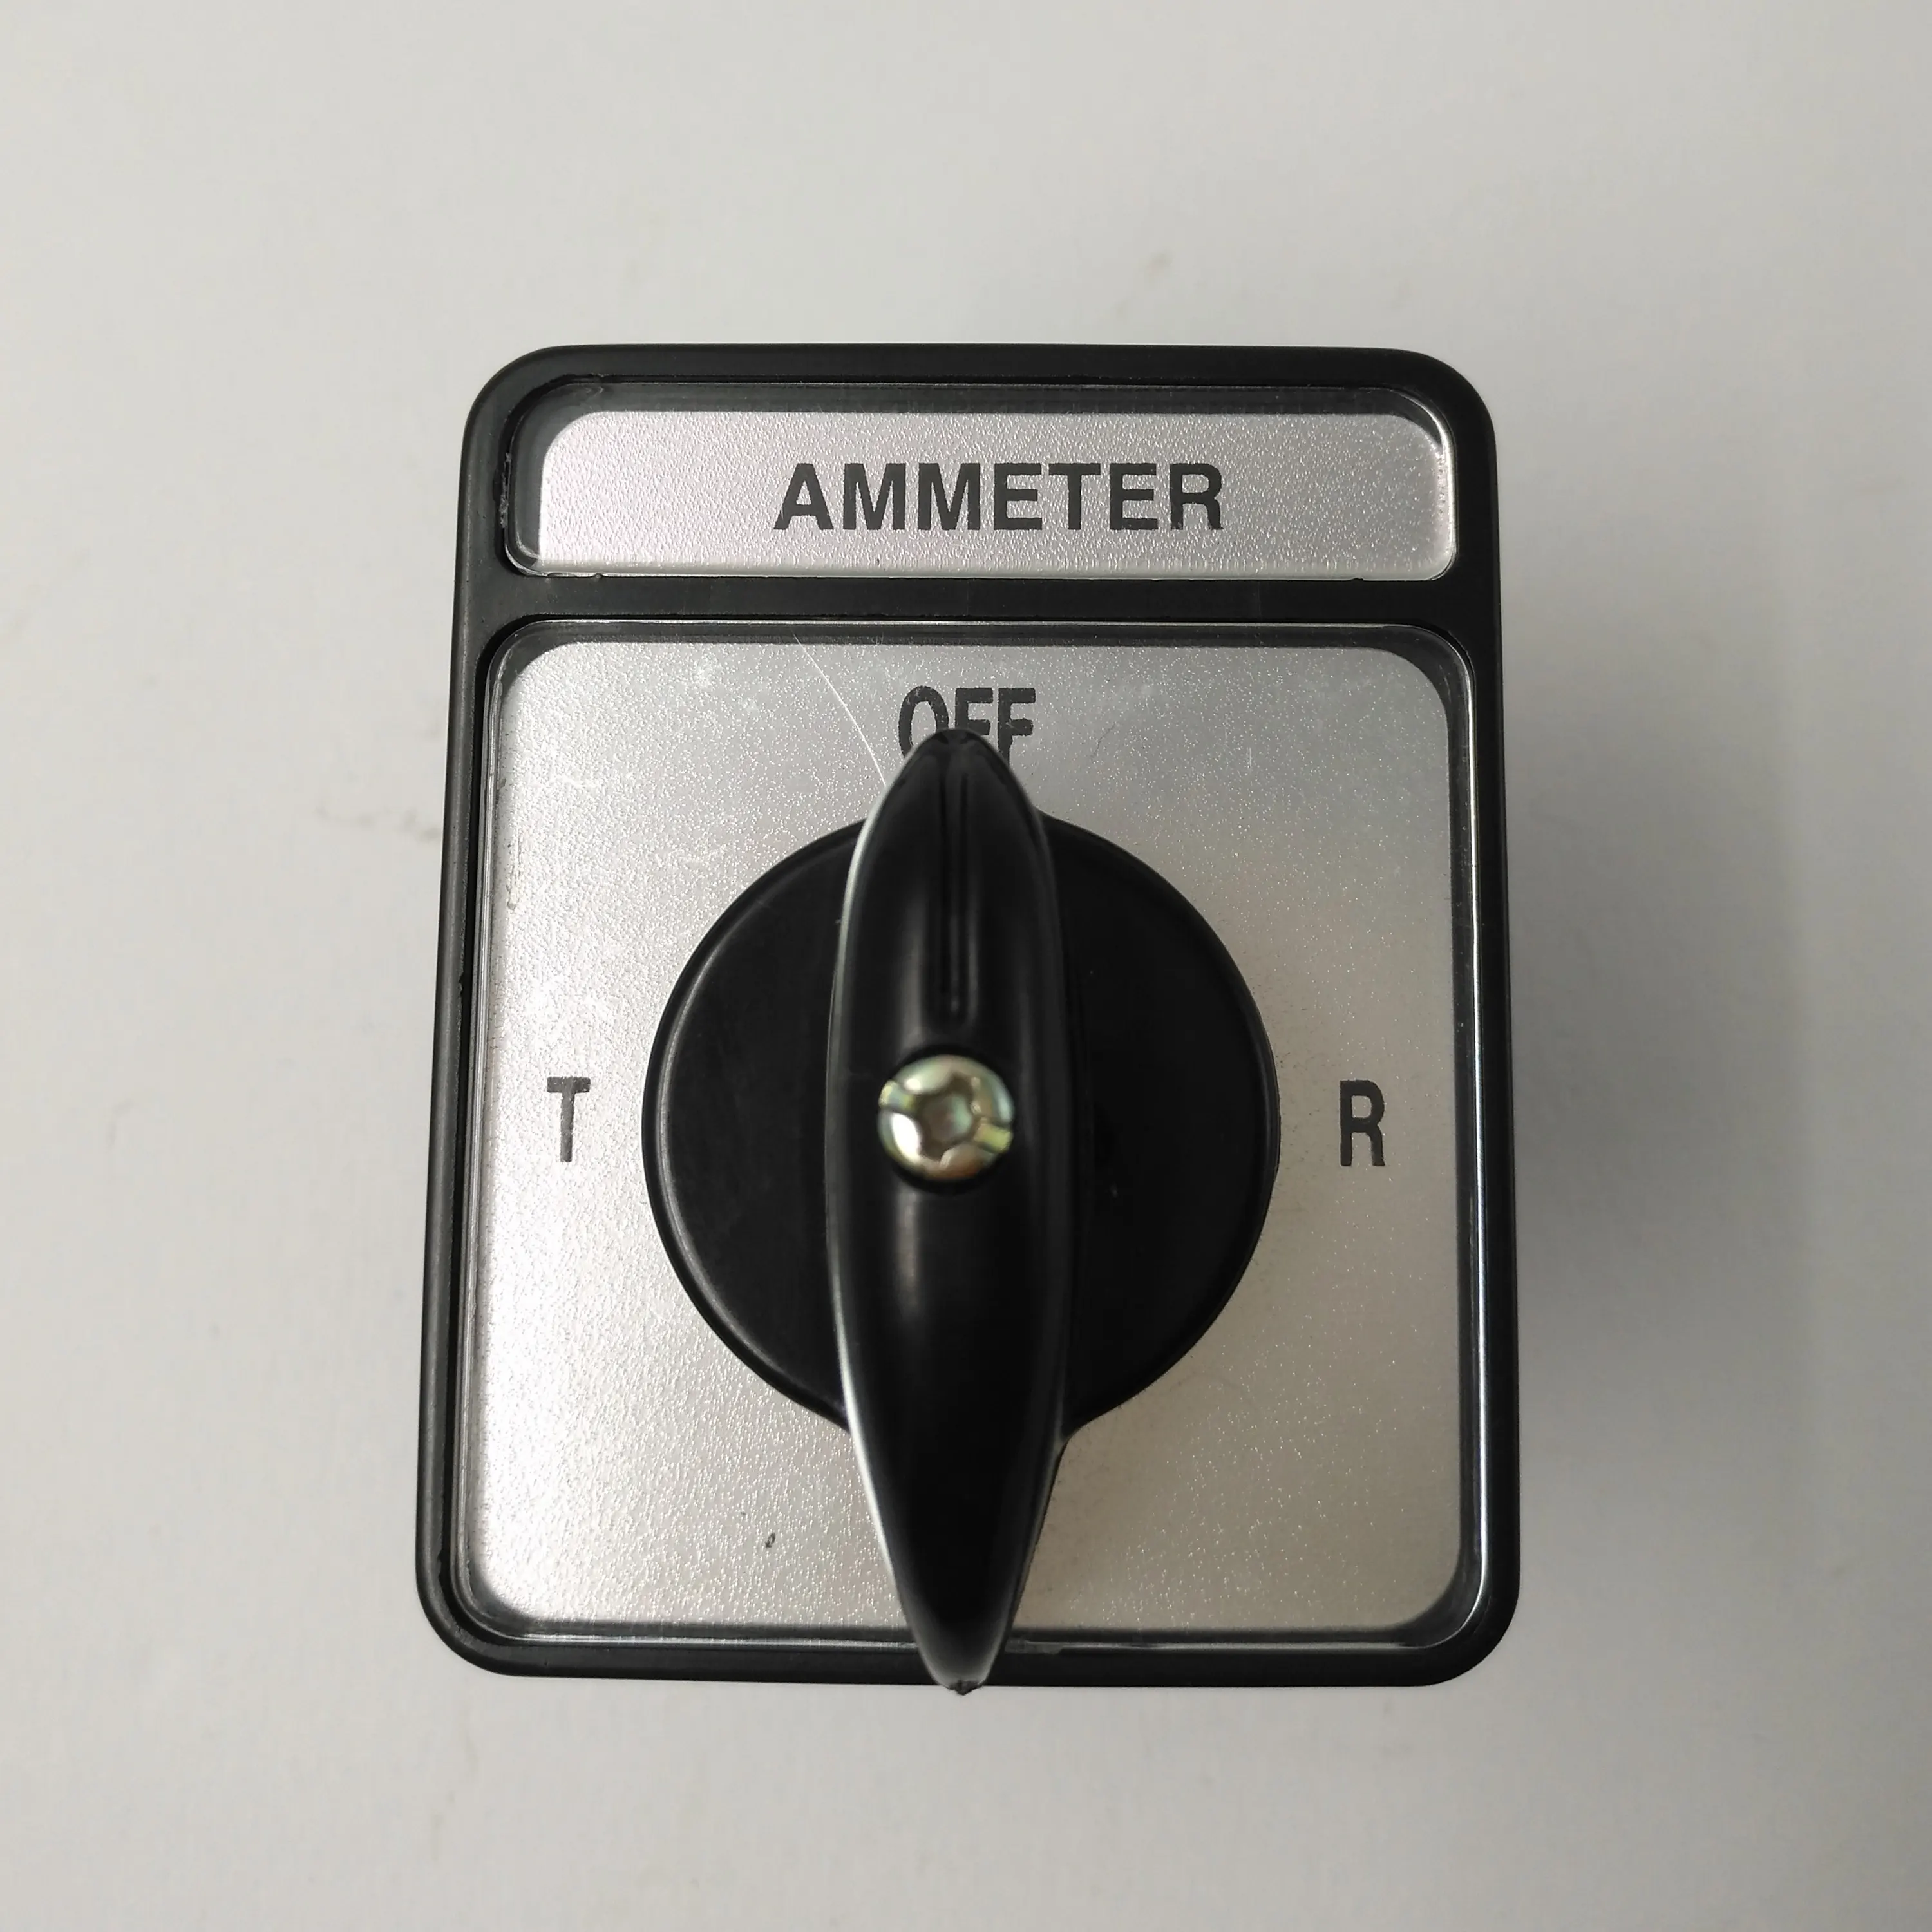 ammeter rotary changeover switch lw26-20 series volt and ampere rotary cam switch for ammeter rotary selector switch